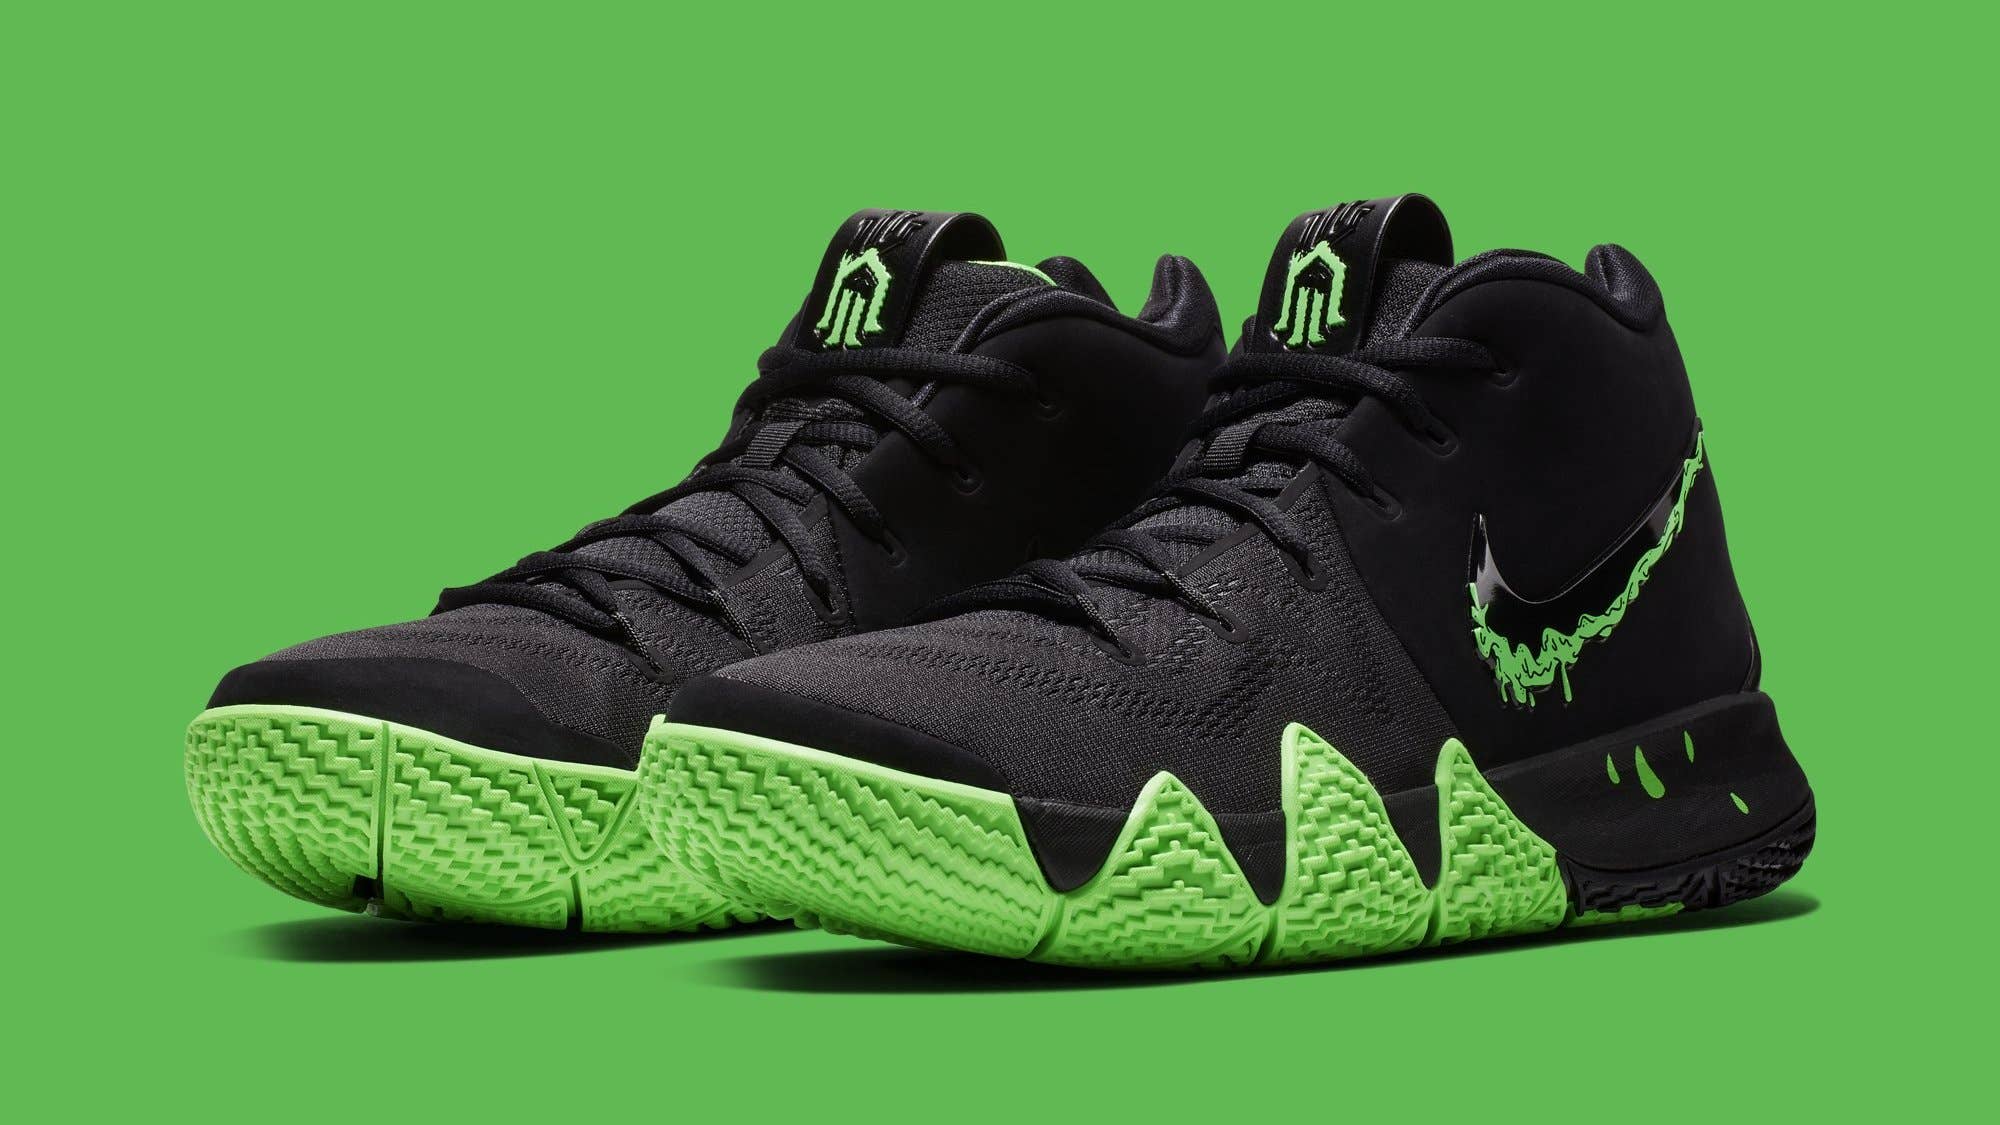 personal miseria presumir This Nike Kyrie 4 Is Ready for Halloween | Complex